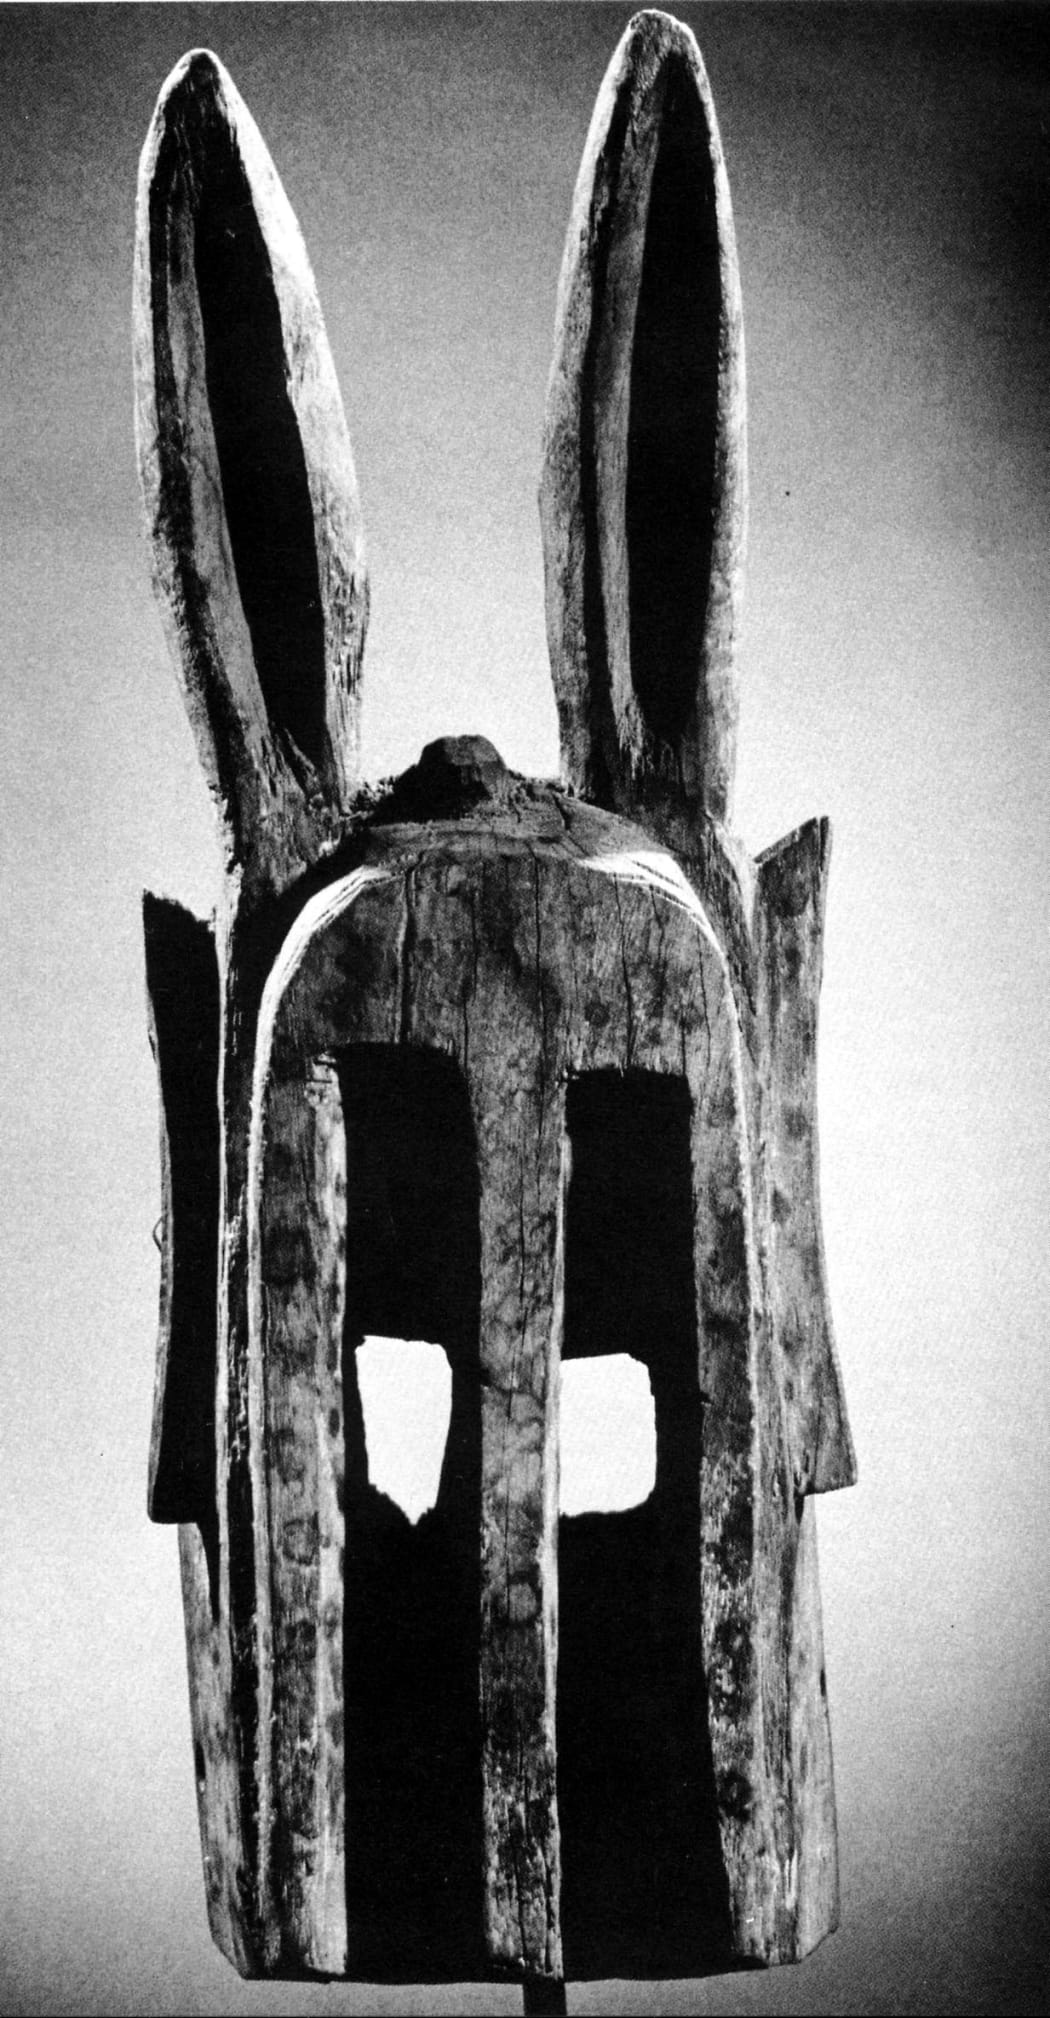 Dogon dyommo (rabbit) mask. Height: 40,5 cm. Image courtesy of the National Museum of African Art, Washington, D.C., USA.